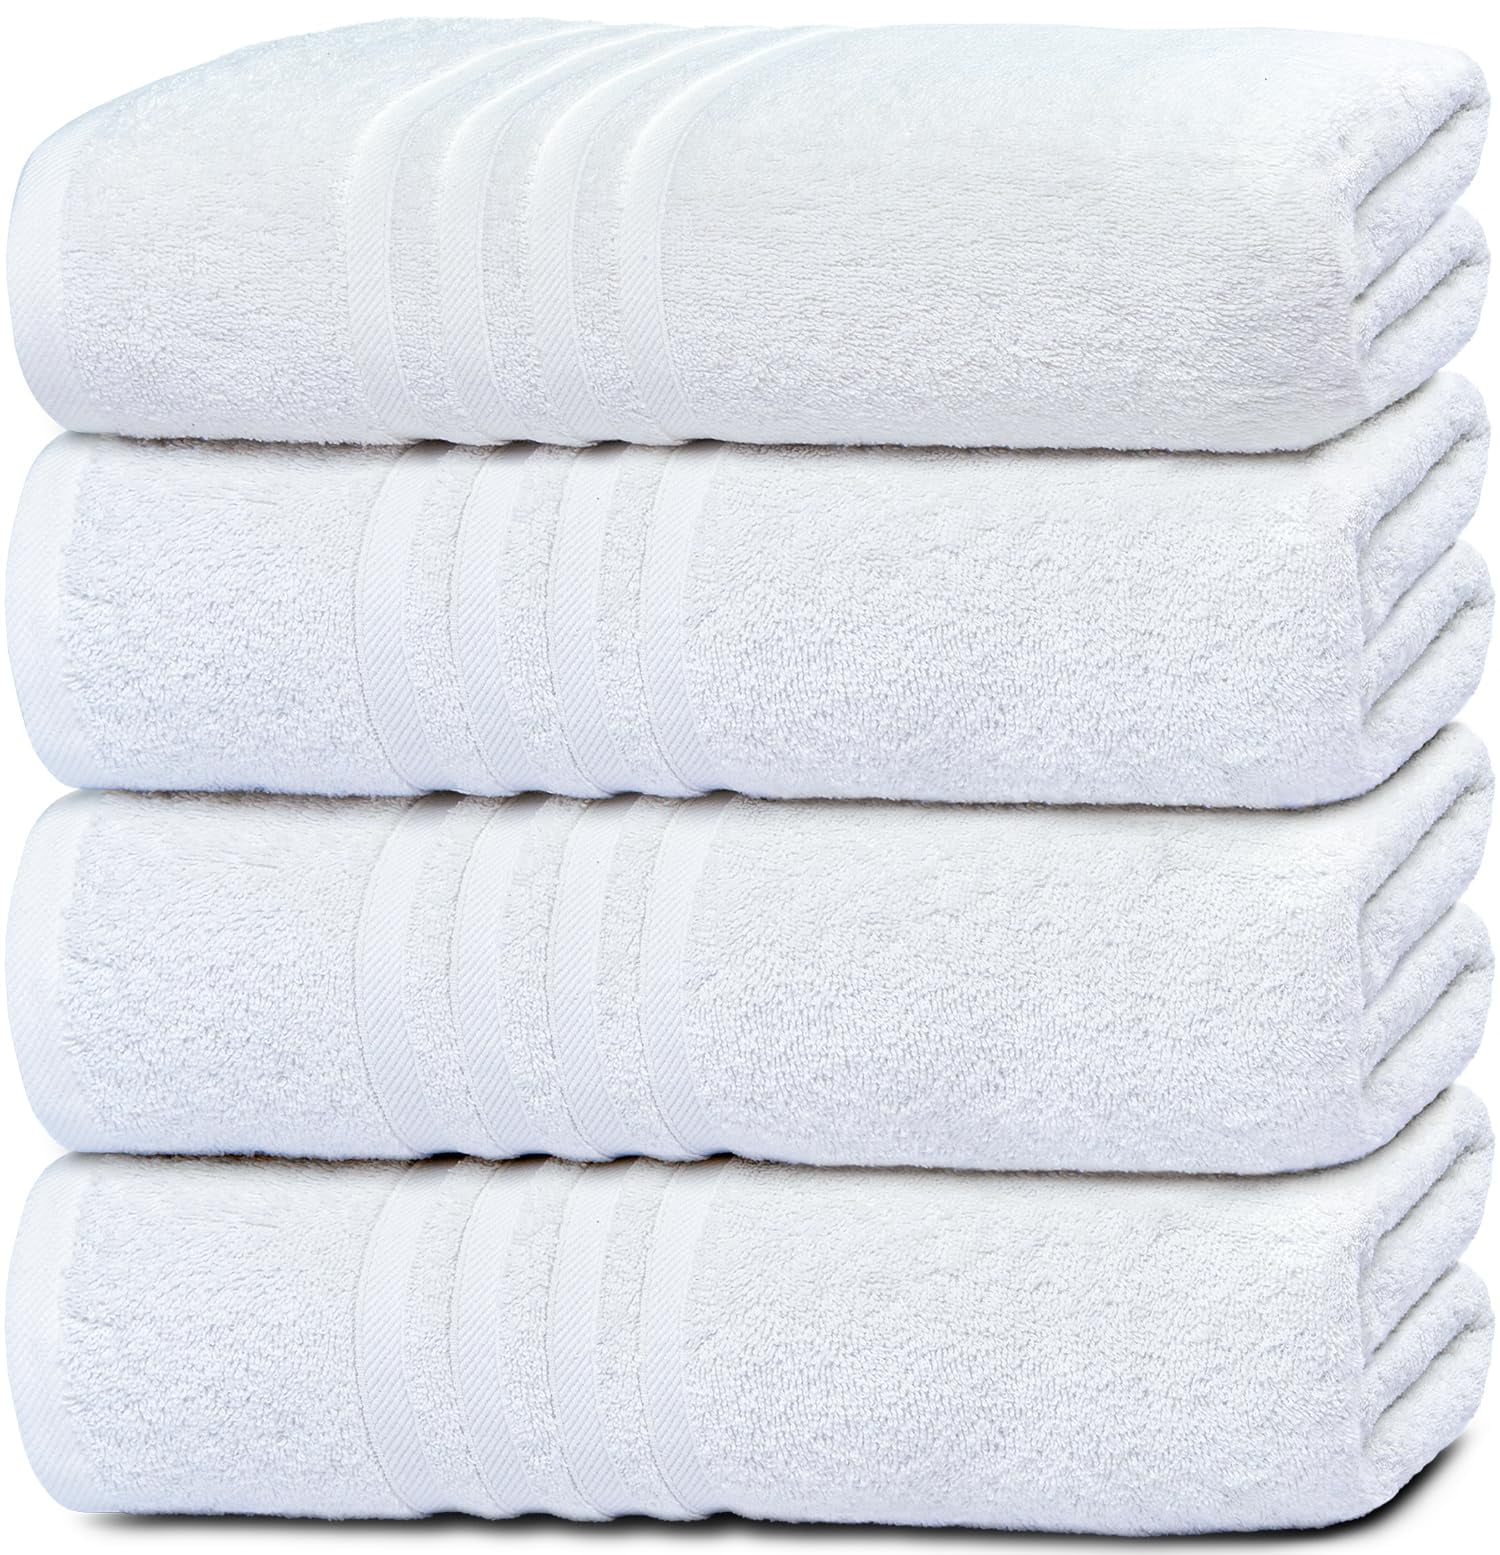 Wealuxe Cotton Bath Towels - Soft and Absorbent Hotel Towel - 27x52 Inch -  4 Pack - White